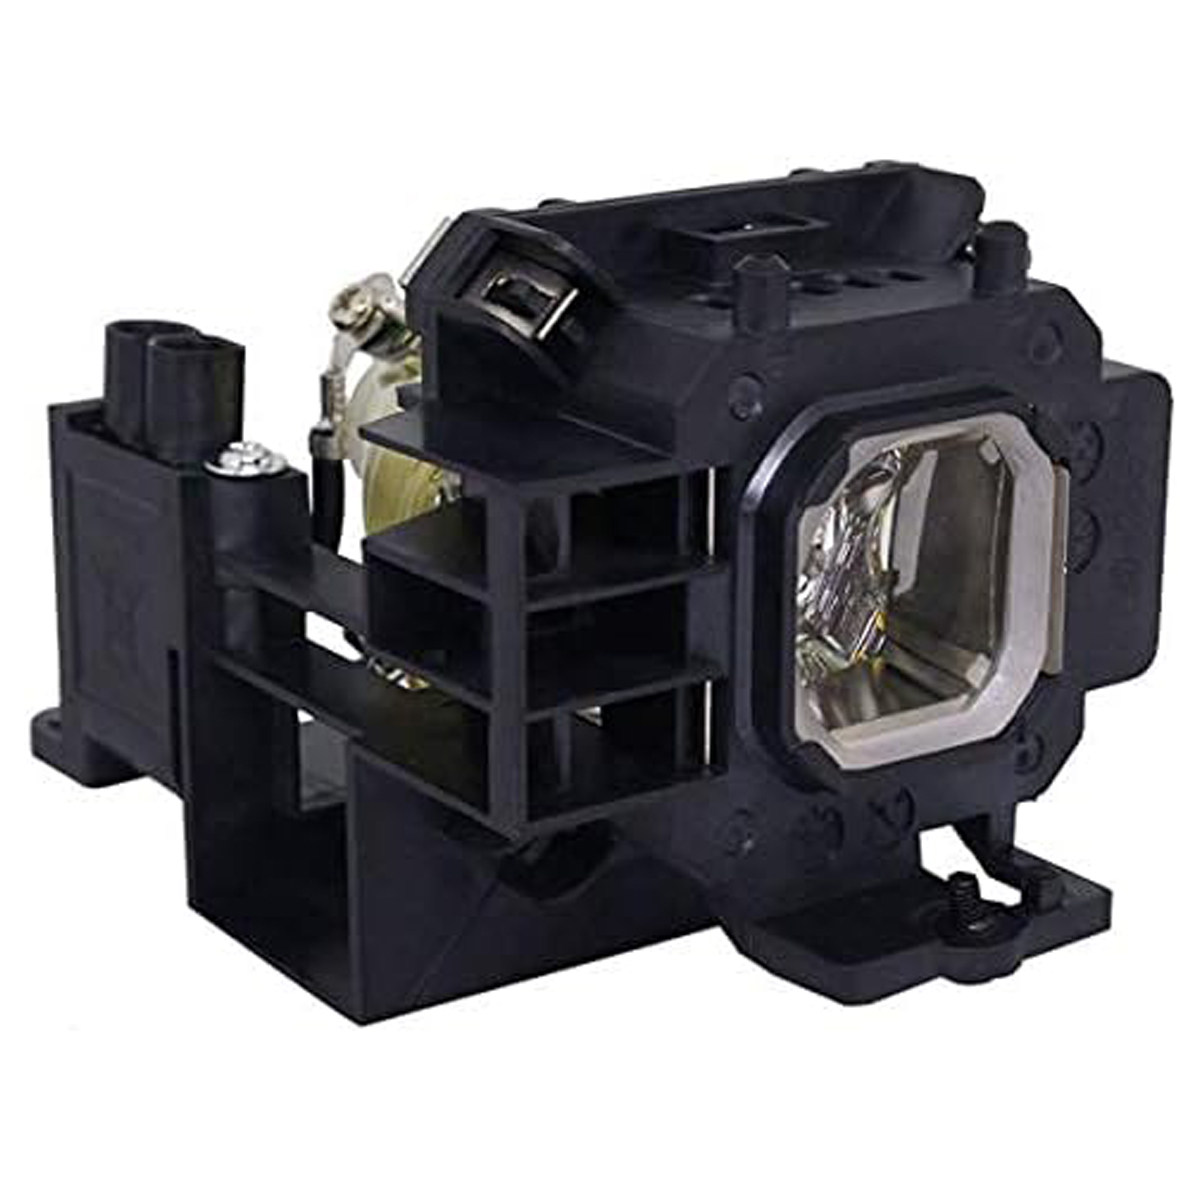 Replacement Projector lamp LV-LP31/3522B003AA For CANON LV-7275/LV-7370/ LV-7375/ LV-7385